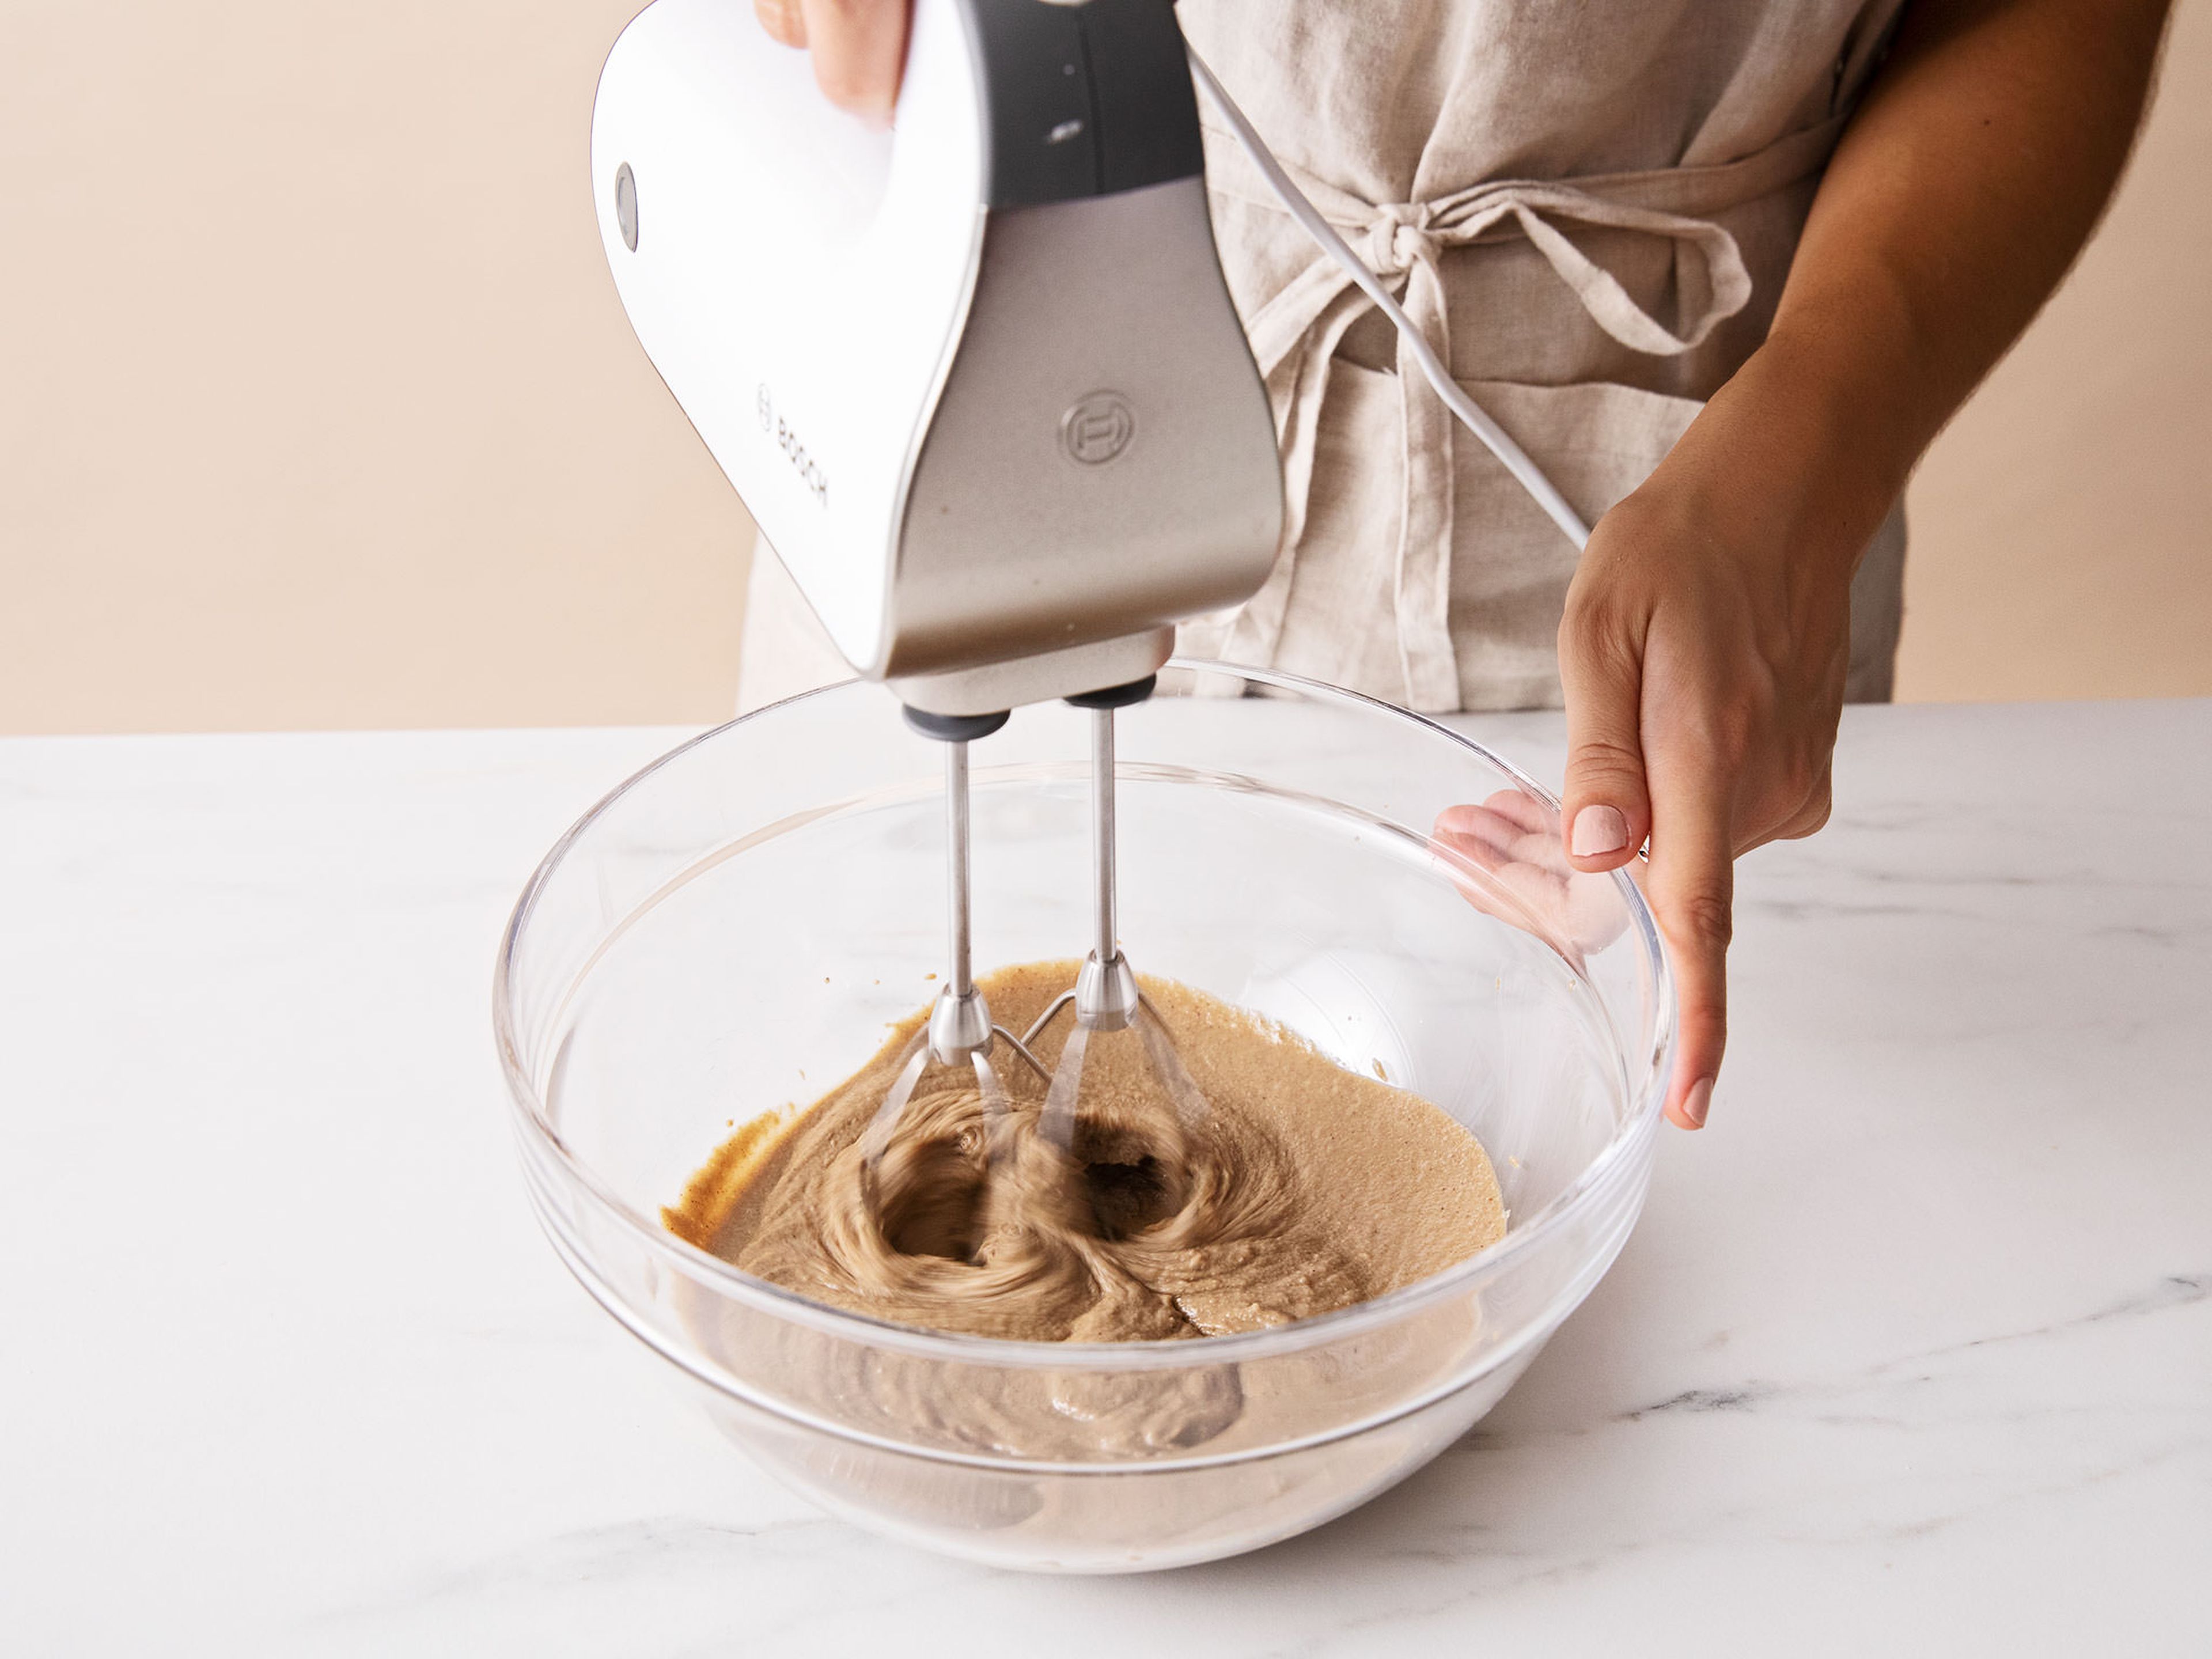 Add tahini and salt to a bowl and beat with a hand mixer with beaters on medium speed. Carefully pour bubbling sugar mixture into the tahini. Mix until it’s fully incorporated and fudgy, approx. 20 seconds. Do not overmix!